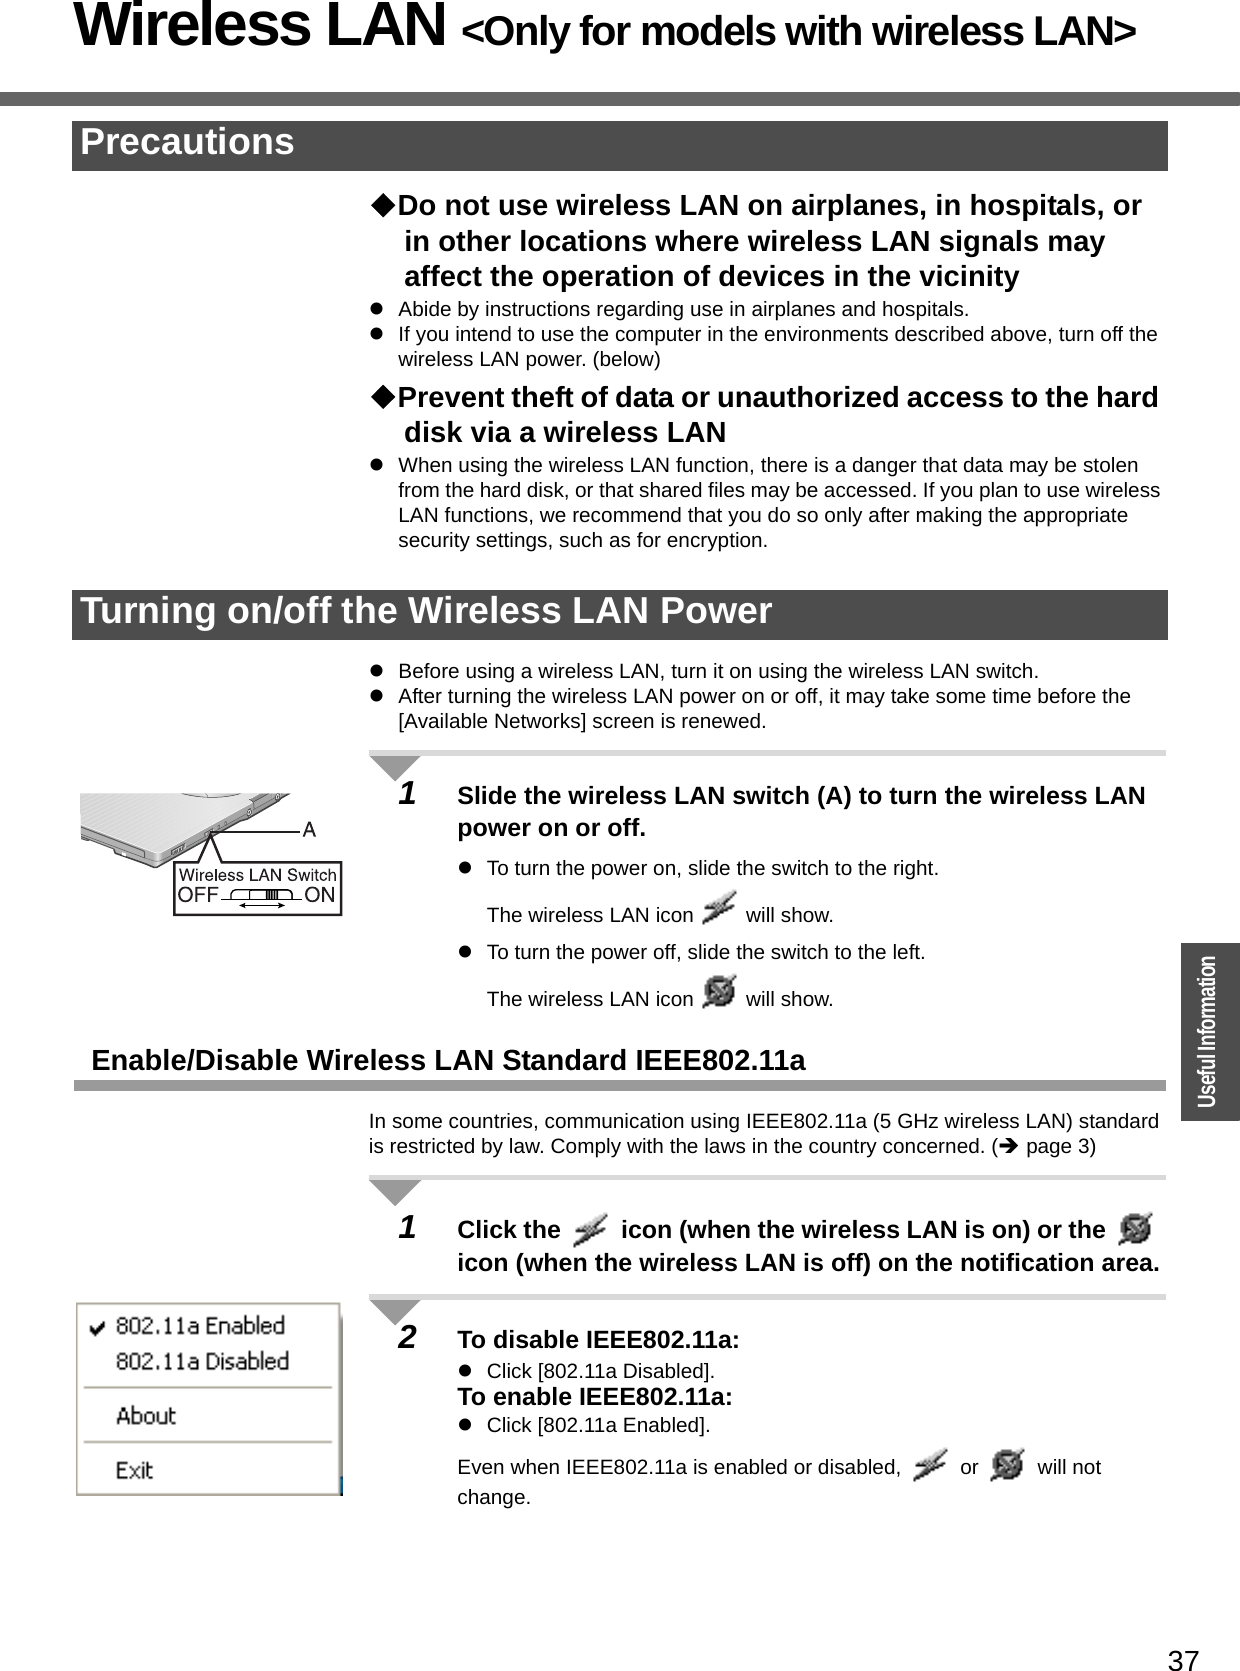 37OperationUseful InformationWireless LAN &lt;Only for models with wireless LAN&gt;Do not use wireless LAN on airplanes, in hospitals, or in other locations where wireless LAN signals may affect the operation of devices in the vicinityzAbide by instructions regarding use in airplanes and hospitals.zIf you intend to use the computer in the environments described above, turn off the wireless LAN power. (below)Prevent theft of data or unauthorized access to the hard disk via a wireless LANzWhen using the wireless LAN function, there is a danger that data may be stolen from the hard disk, or that shared files may be accessed. If you plan to use wireless LAN functions, we recommend that you do so only after making the appropriate security settings, such as for encryption.zBefore using a wireless LAN, turn it on using the wireless LAN switch.zAfter turning the wireless LAN power on or off, it may take some time before the [Available Networks] screen is renewed.1Slide the wireless LAN switch (A) to turn the wireless LAN power on or off. zTo turn the power on, slide the switch to the right. The wireless LAN icon   will show. zTo turn the power off, slide the switch to the left. The wireless LAN icon   will show.Enable/Disable Wireless LAN Standard IEEE802.11aIn some countries, communication using IEEE802.11a (5 GHz wireless LAN) standard is restricted by law. Comply with the laws in the country concerned. (Îpage 3)1Click the   icon (when the wireless LAN is on) or the   icon (when the wireless LAN is off) on the notification area.2To disable IEEE802.11a:zClick [802.11a Disabled].To enable IEEE802.11a:zClick [802.11a Enabled].Even when IEEE802.11a is enabled or disabled,   or   will not change.PrecautionsTurning on/off the Wireless LAN Power